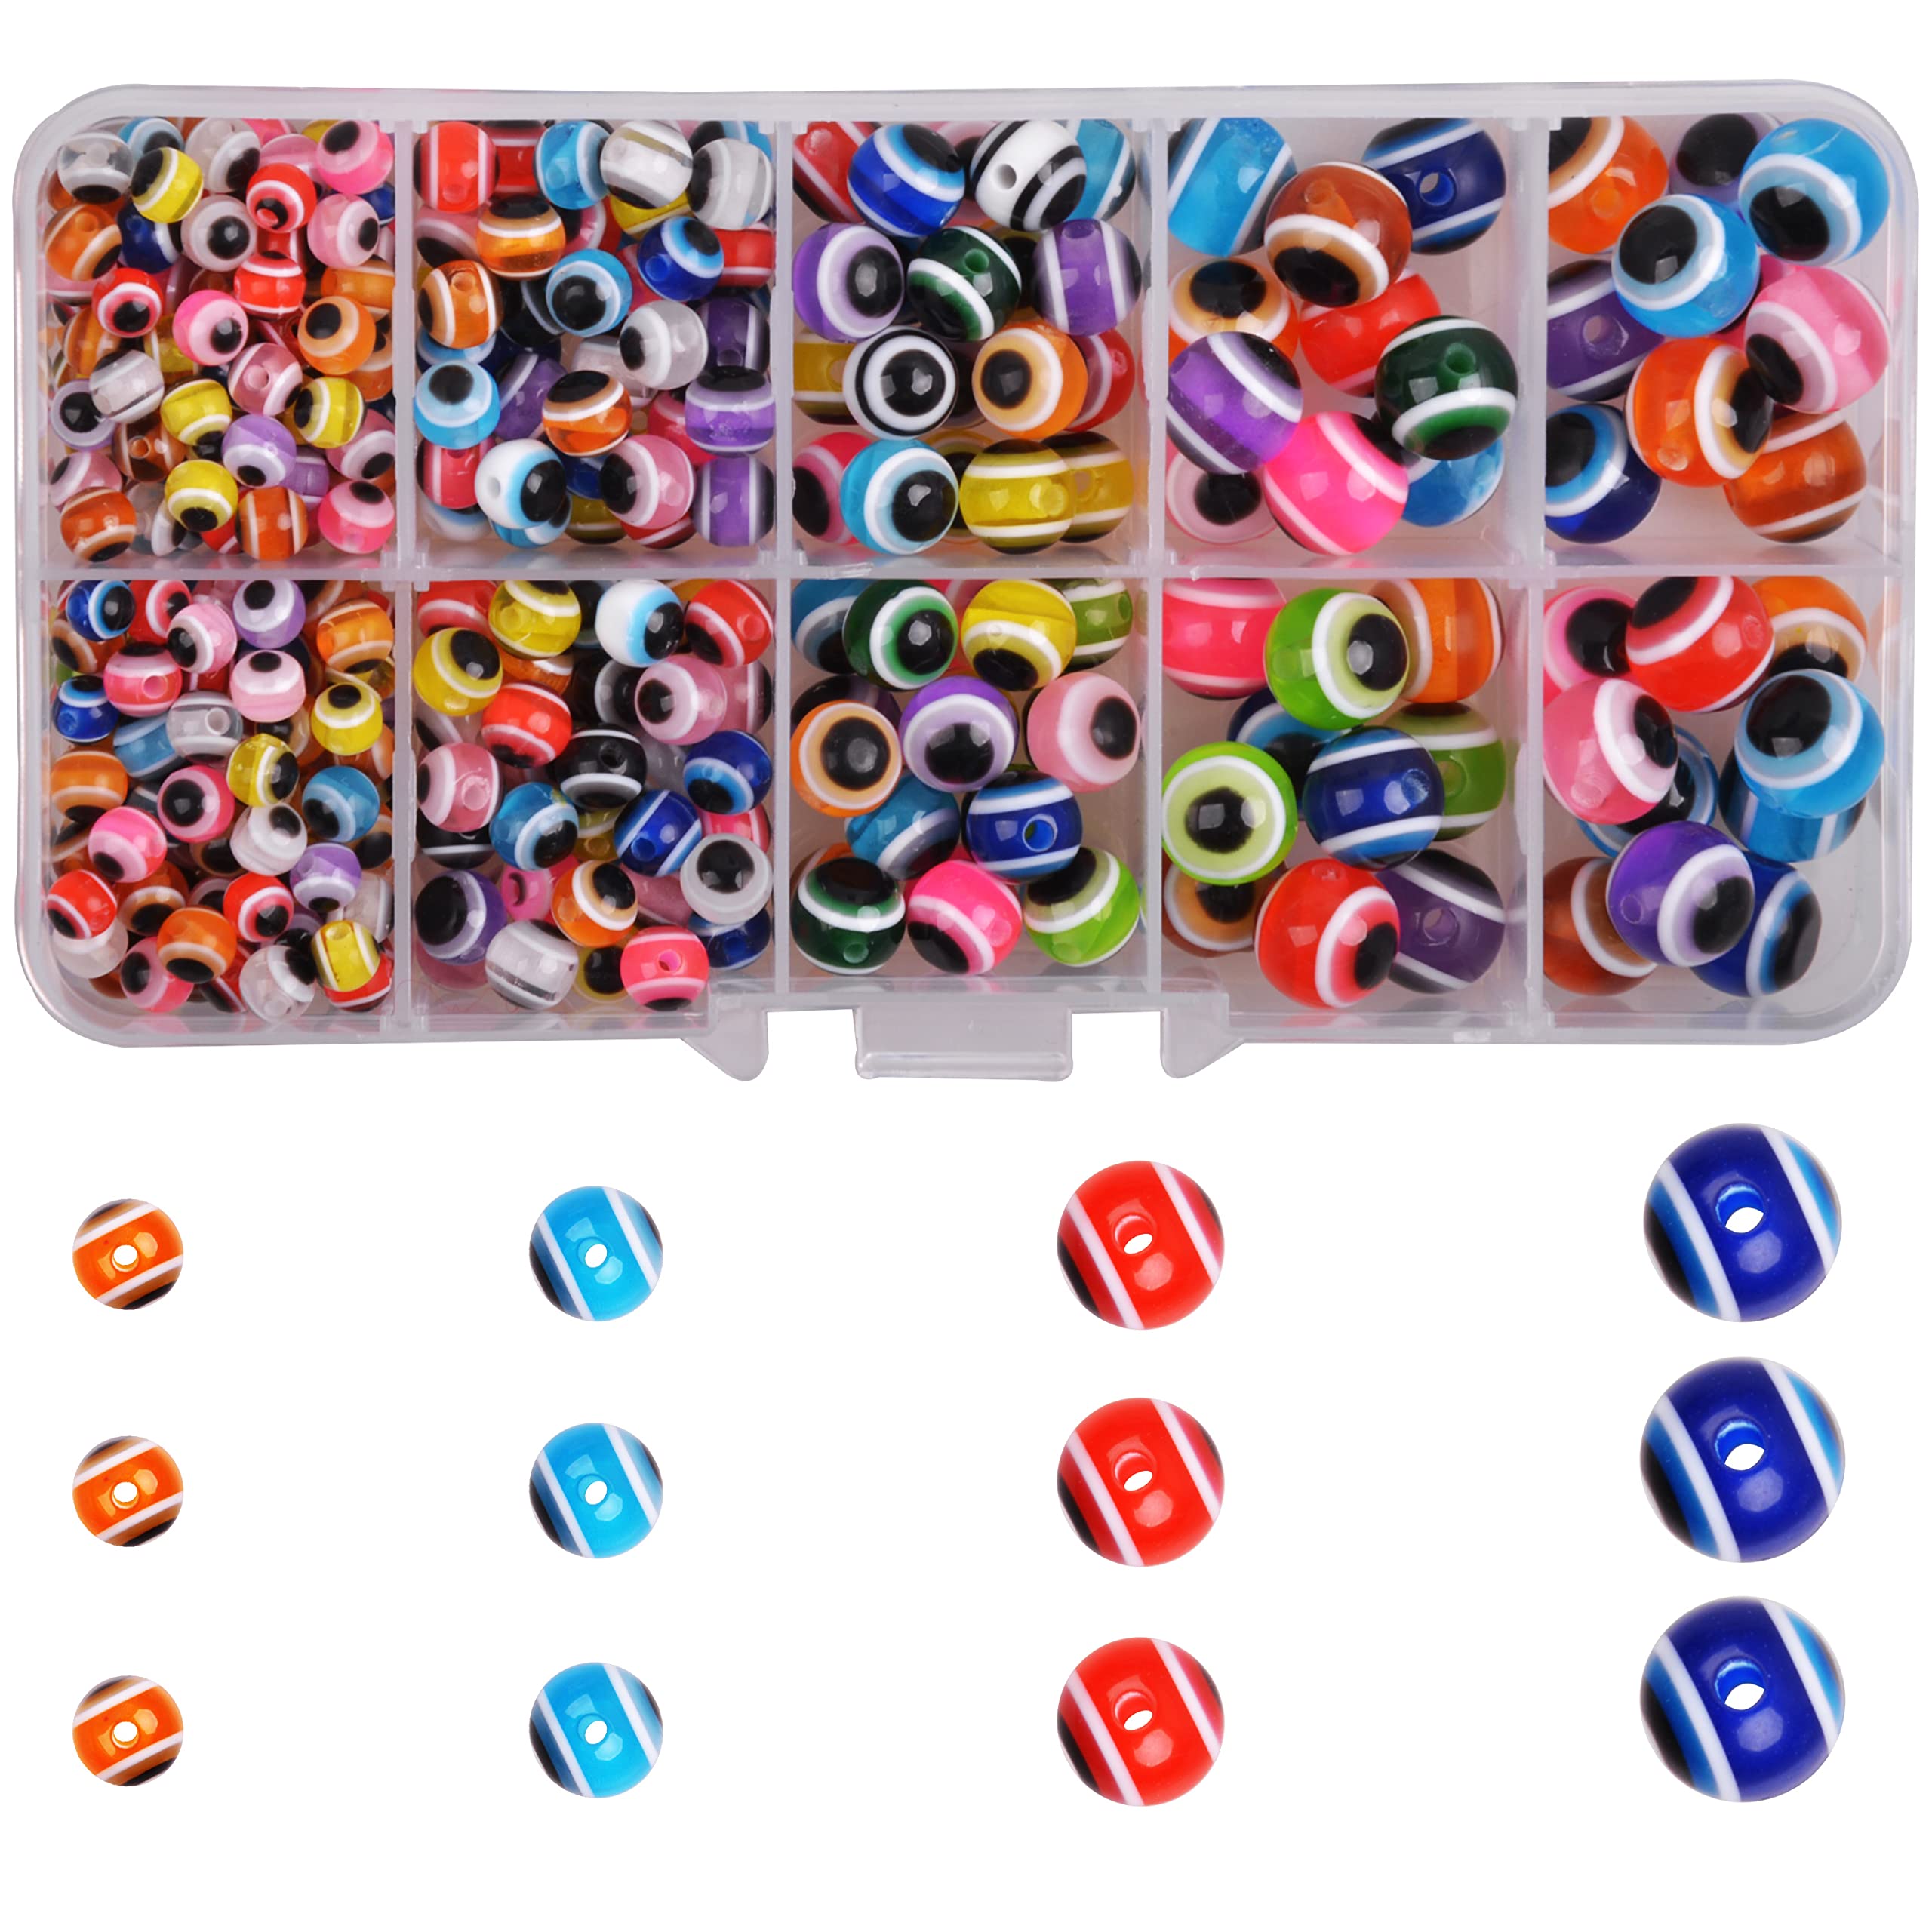 6 Color - 180 Count - 6mm Fishing Bead Wheel Combo Packs - Stone Cold  Fishing Beads